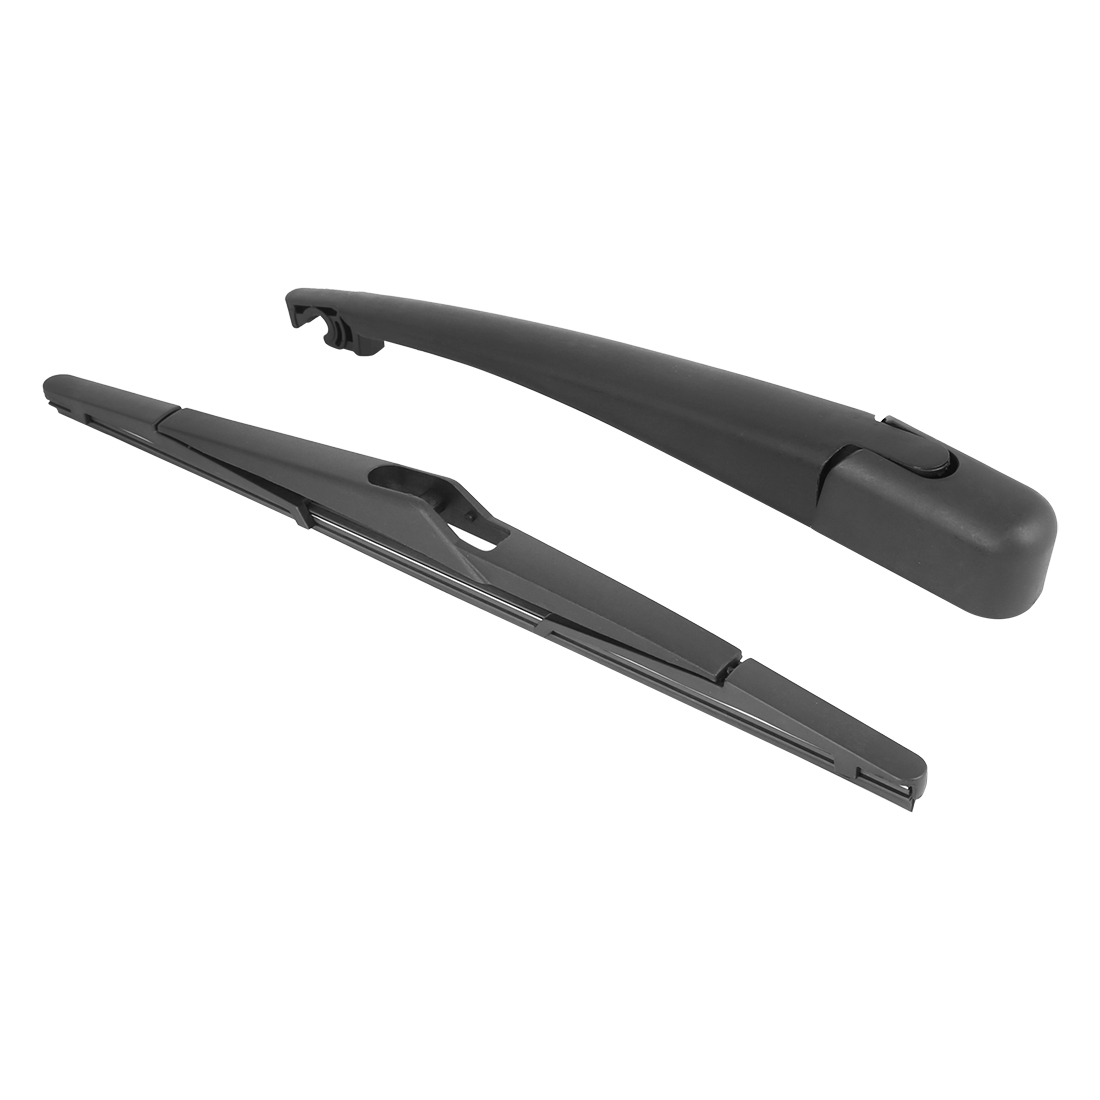 Black Rear Windshield Wiper Blade Arm Set for for Kia Sportage R 2011-2017 12" 310mm - image 5 of 6